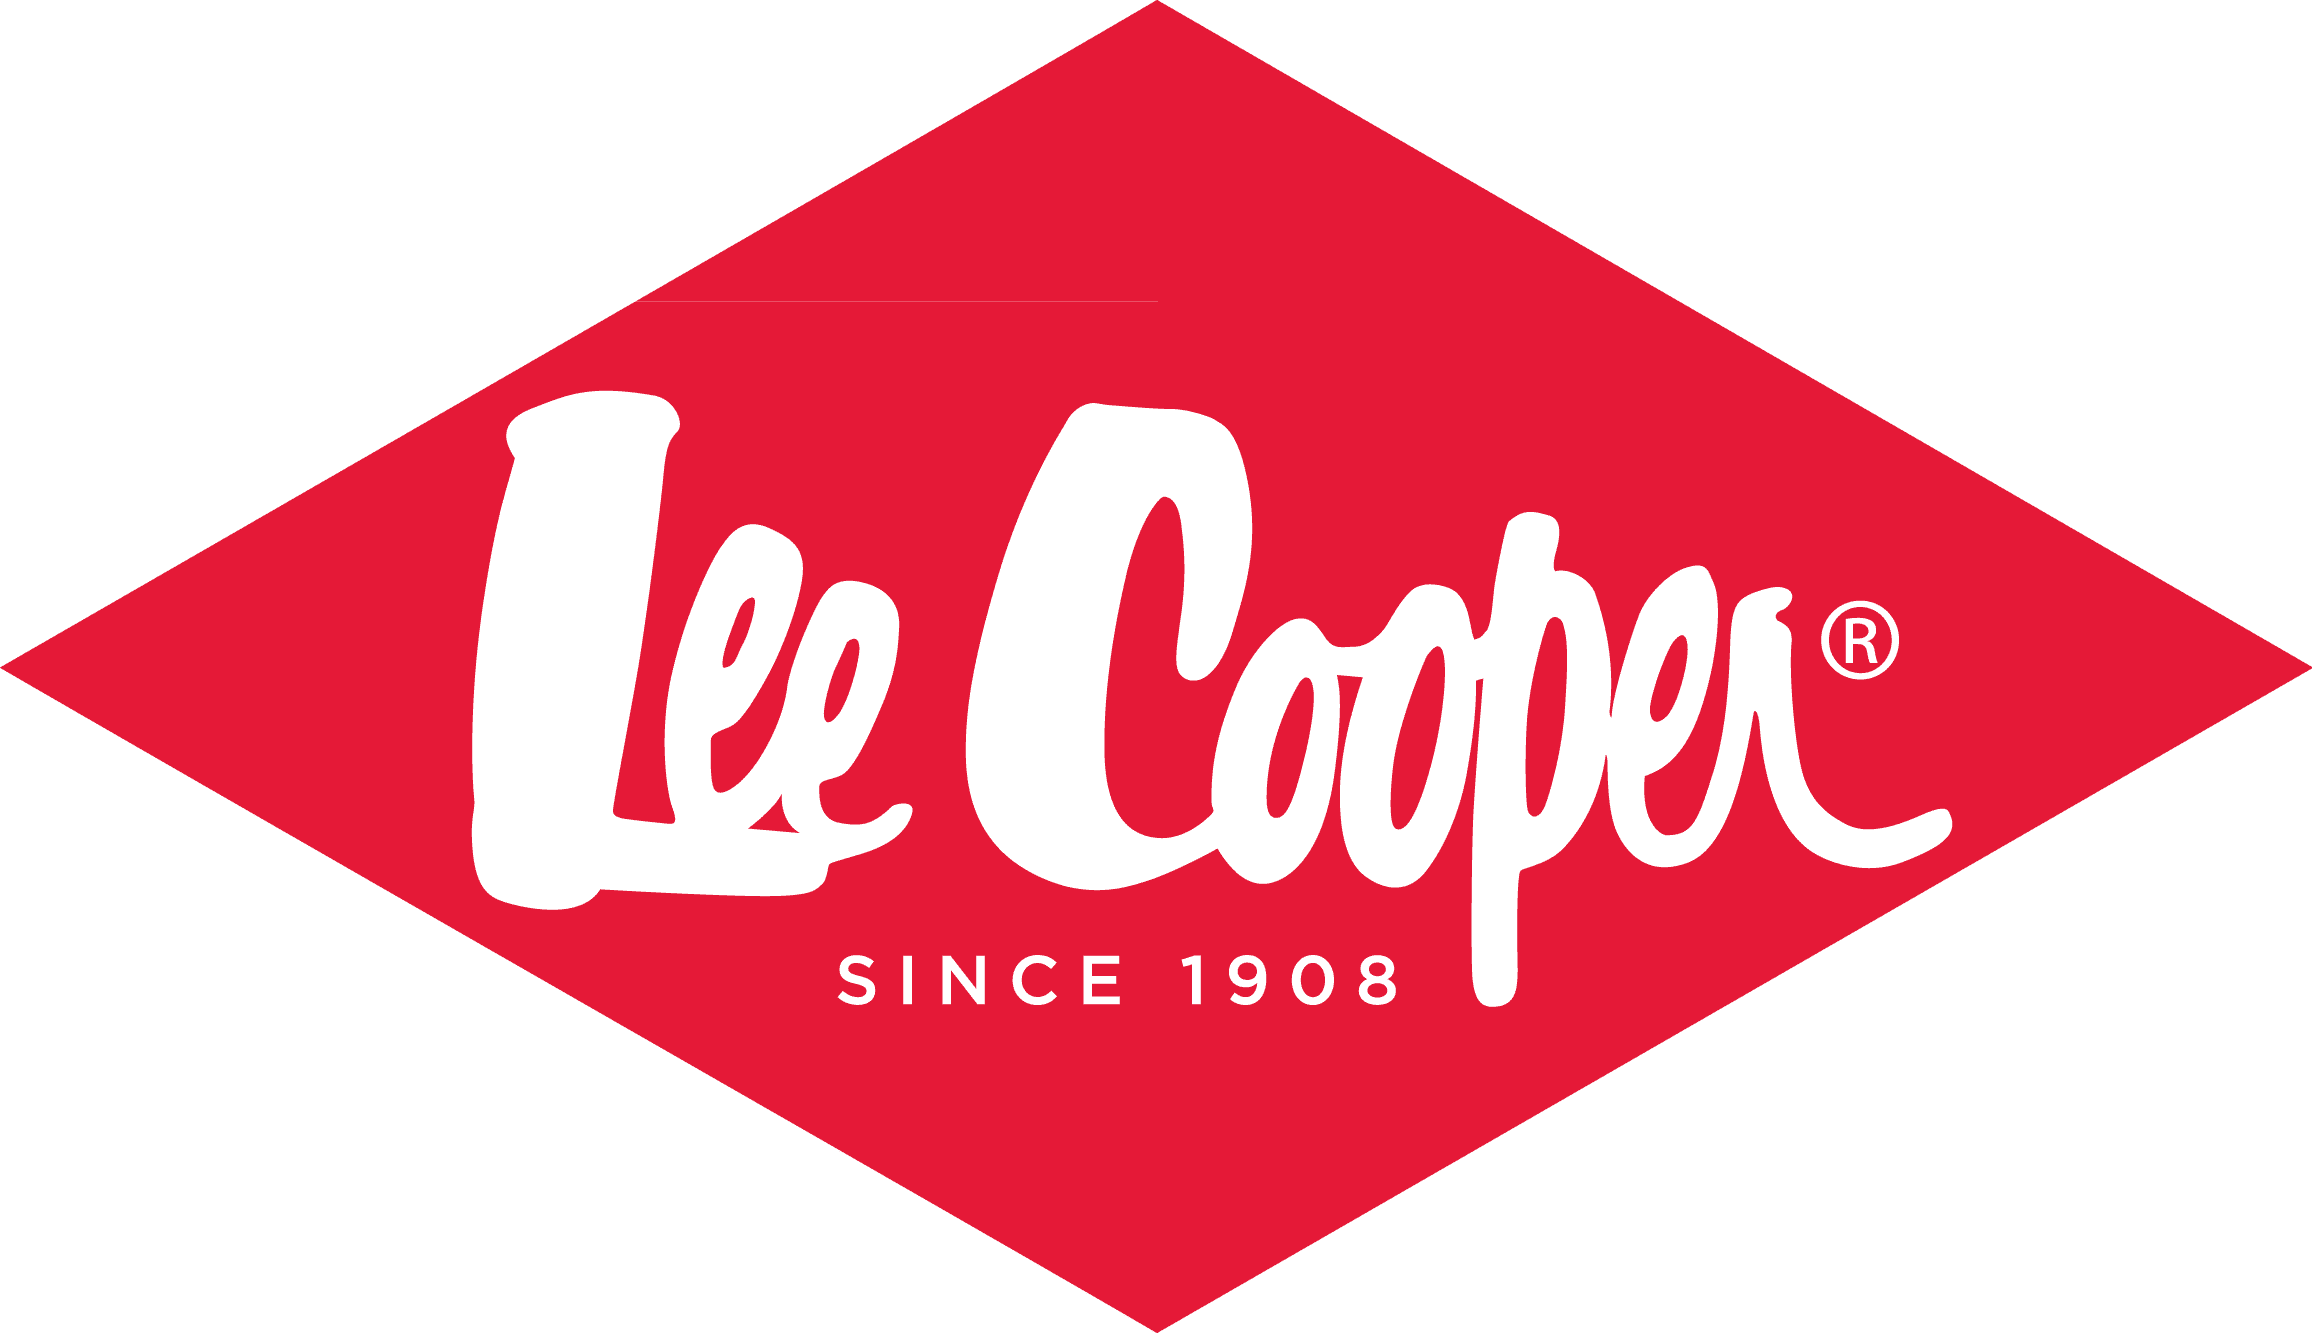 Lee Cooper logo and symbol, meaning, history, PNG